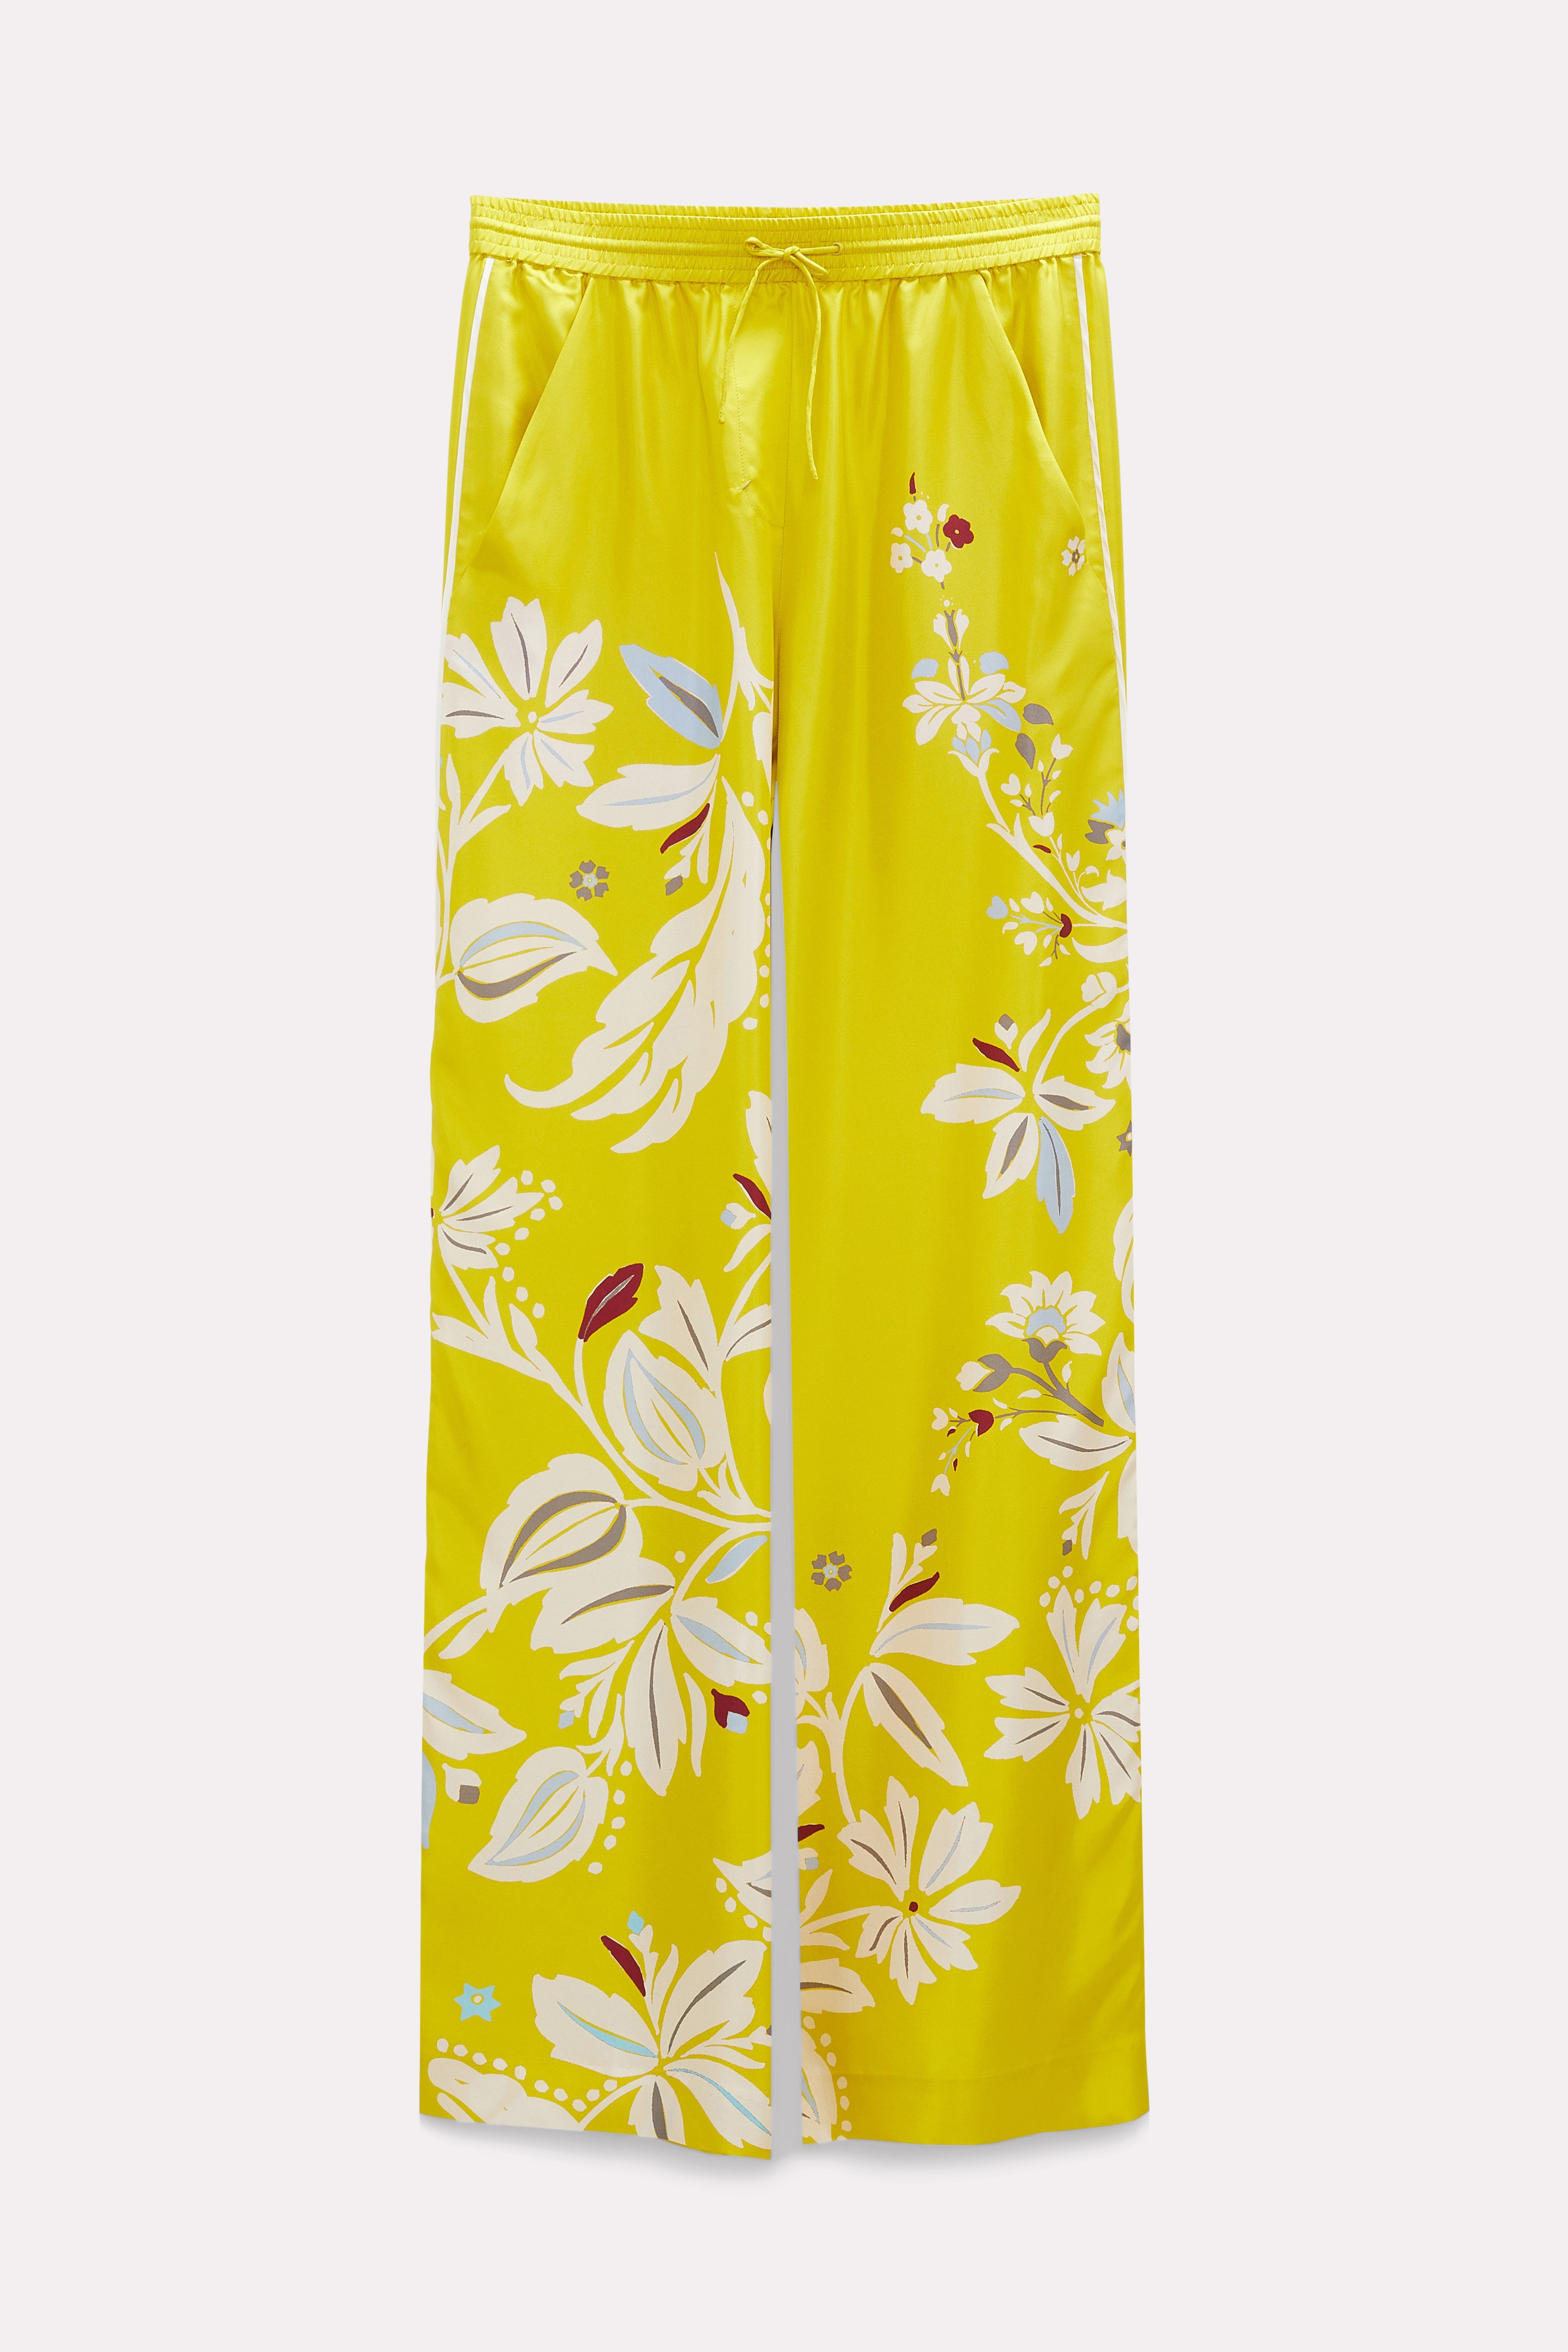 Dorothee-Schumacher-OUTLET-SALE-FLOWER-WHIRL-pants-Hosen-ARCHIVE-COLLECTION.jpg